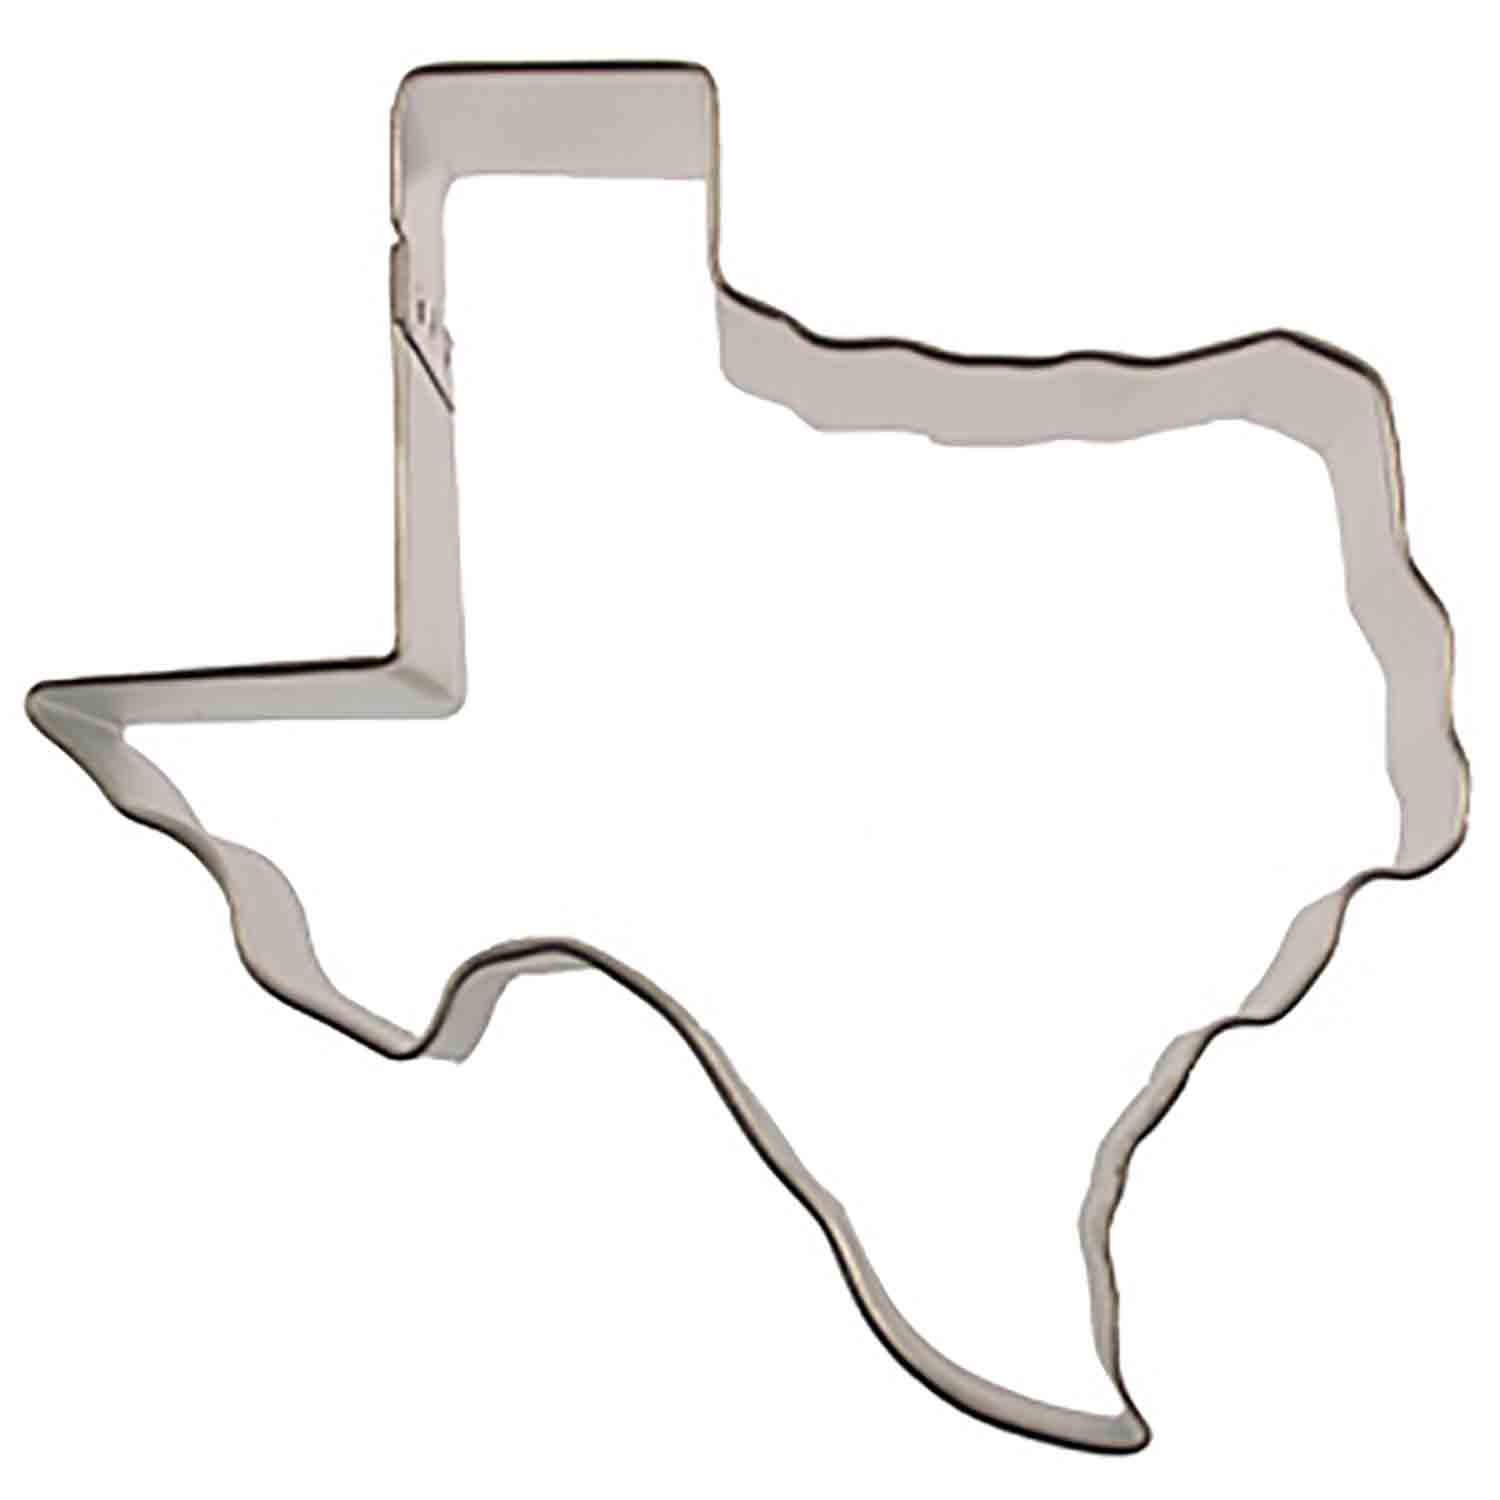 Texas State Cookie Cutter